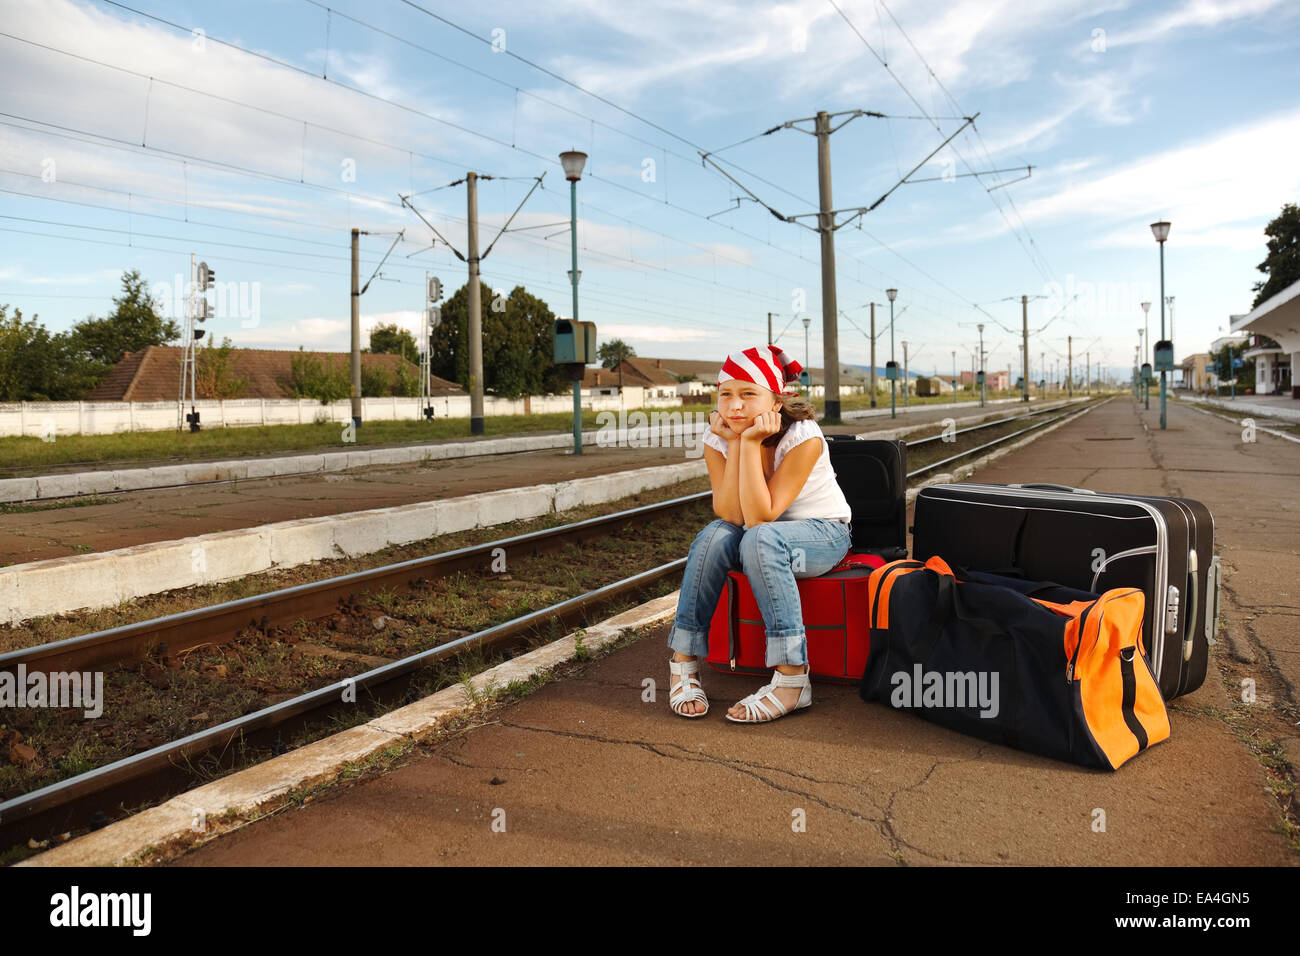 Young girl sitting on luggage and waiting for train in the station Stock Photo